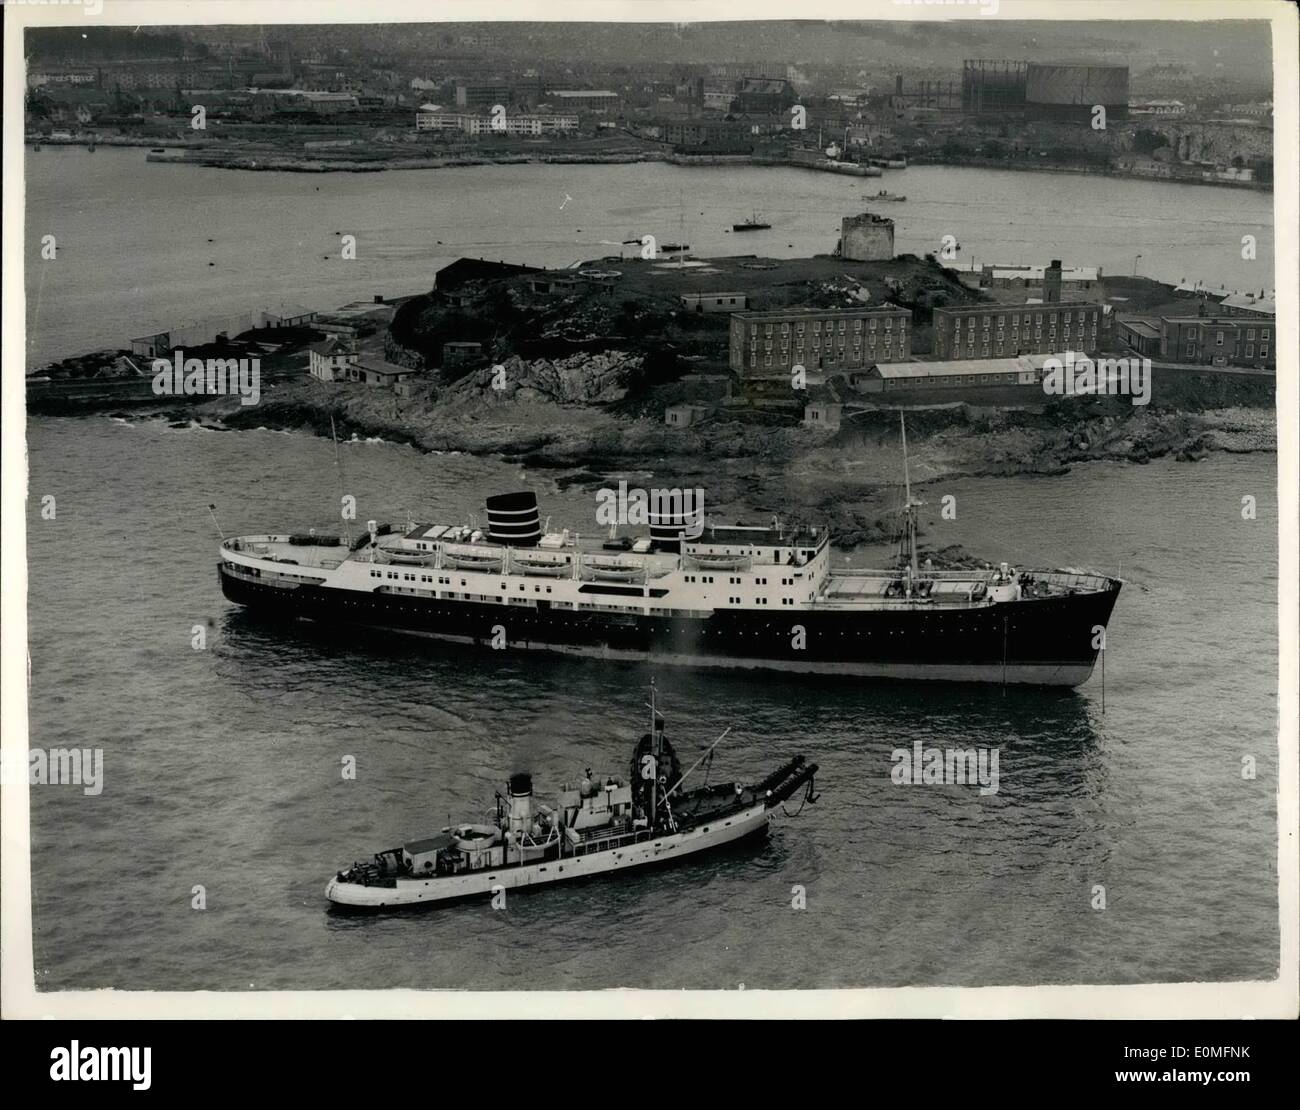 Mar. 03, 1955 - Norewegian Liner Aground off Plymouth Hoe.. As seen From the Air: Never before has a liner come so close to Plymouth Hoe.. So close, in fact, that the 6,269 ton ''Venus'' is on the rooks. Twice yesterday tugs tried to refloat her. This morning's attempt left ''Venus'' as seen in this picture from the air.. Five Thousand people watched as tuge tried again last night- the liner lifted but remained fast on the rocks.. Heavy gear and cargo is being removed he give her a better chance of being reflated at the next high tide. Stock Photo